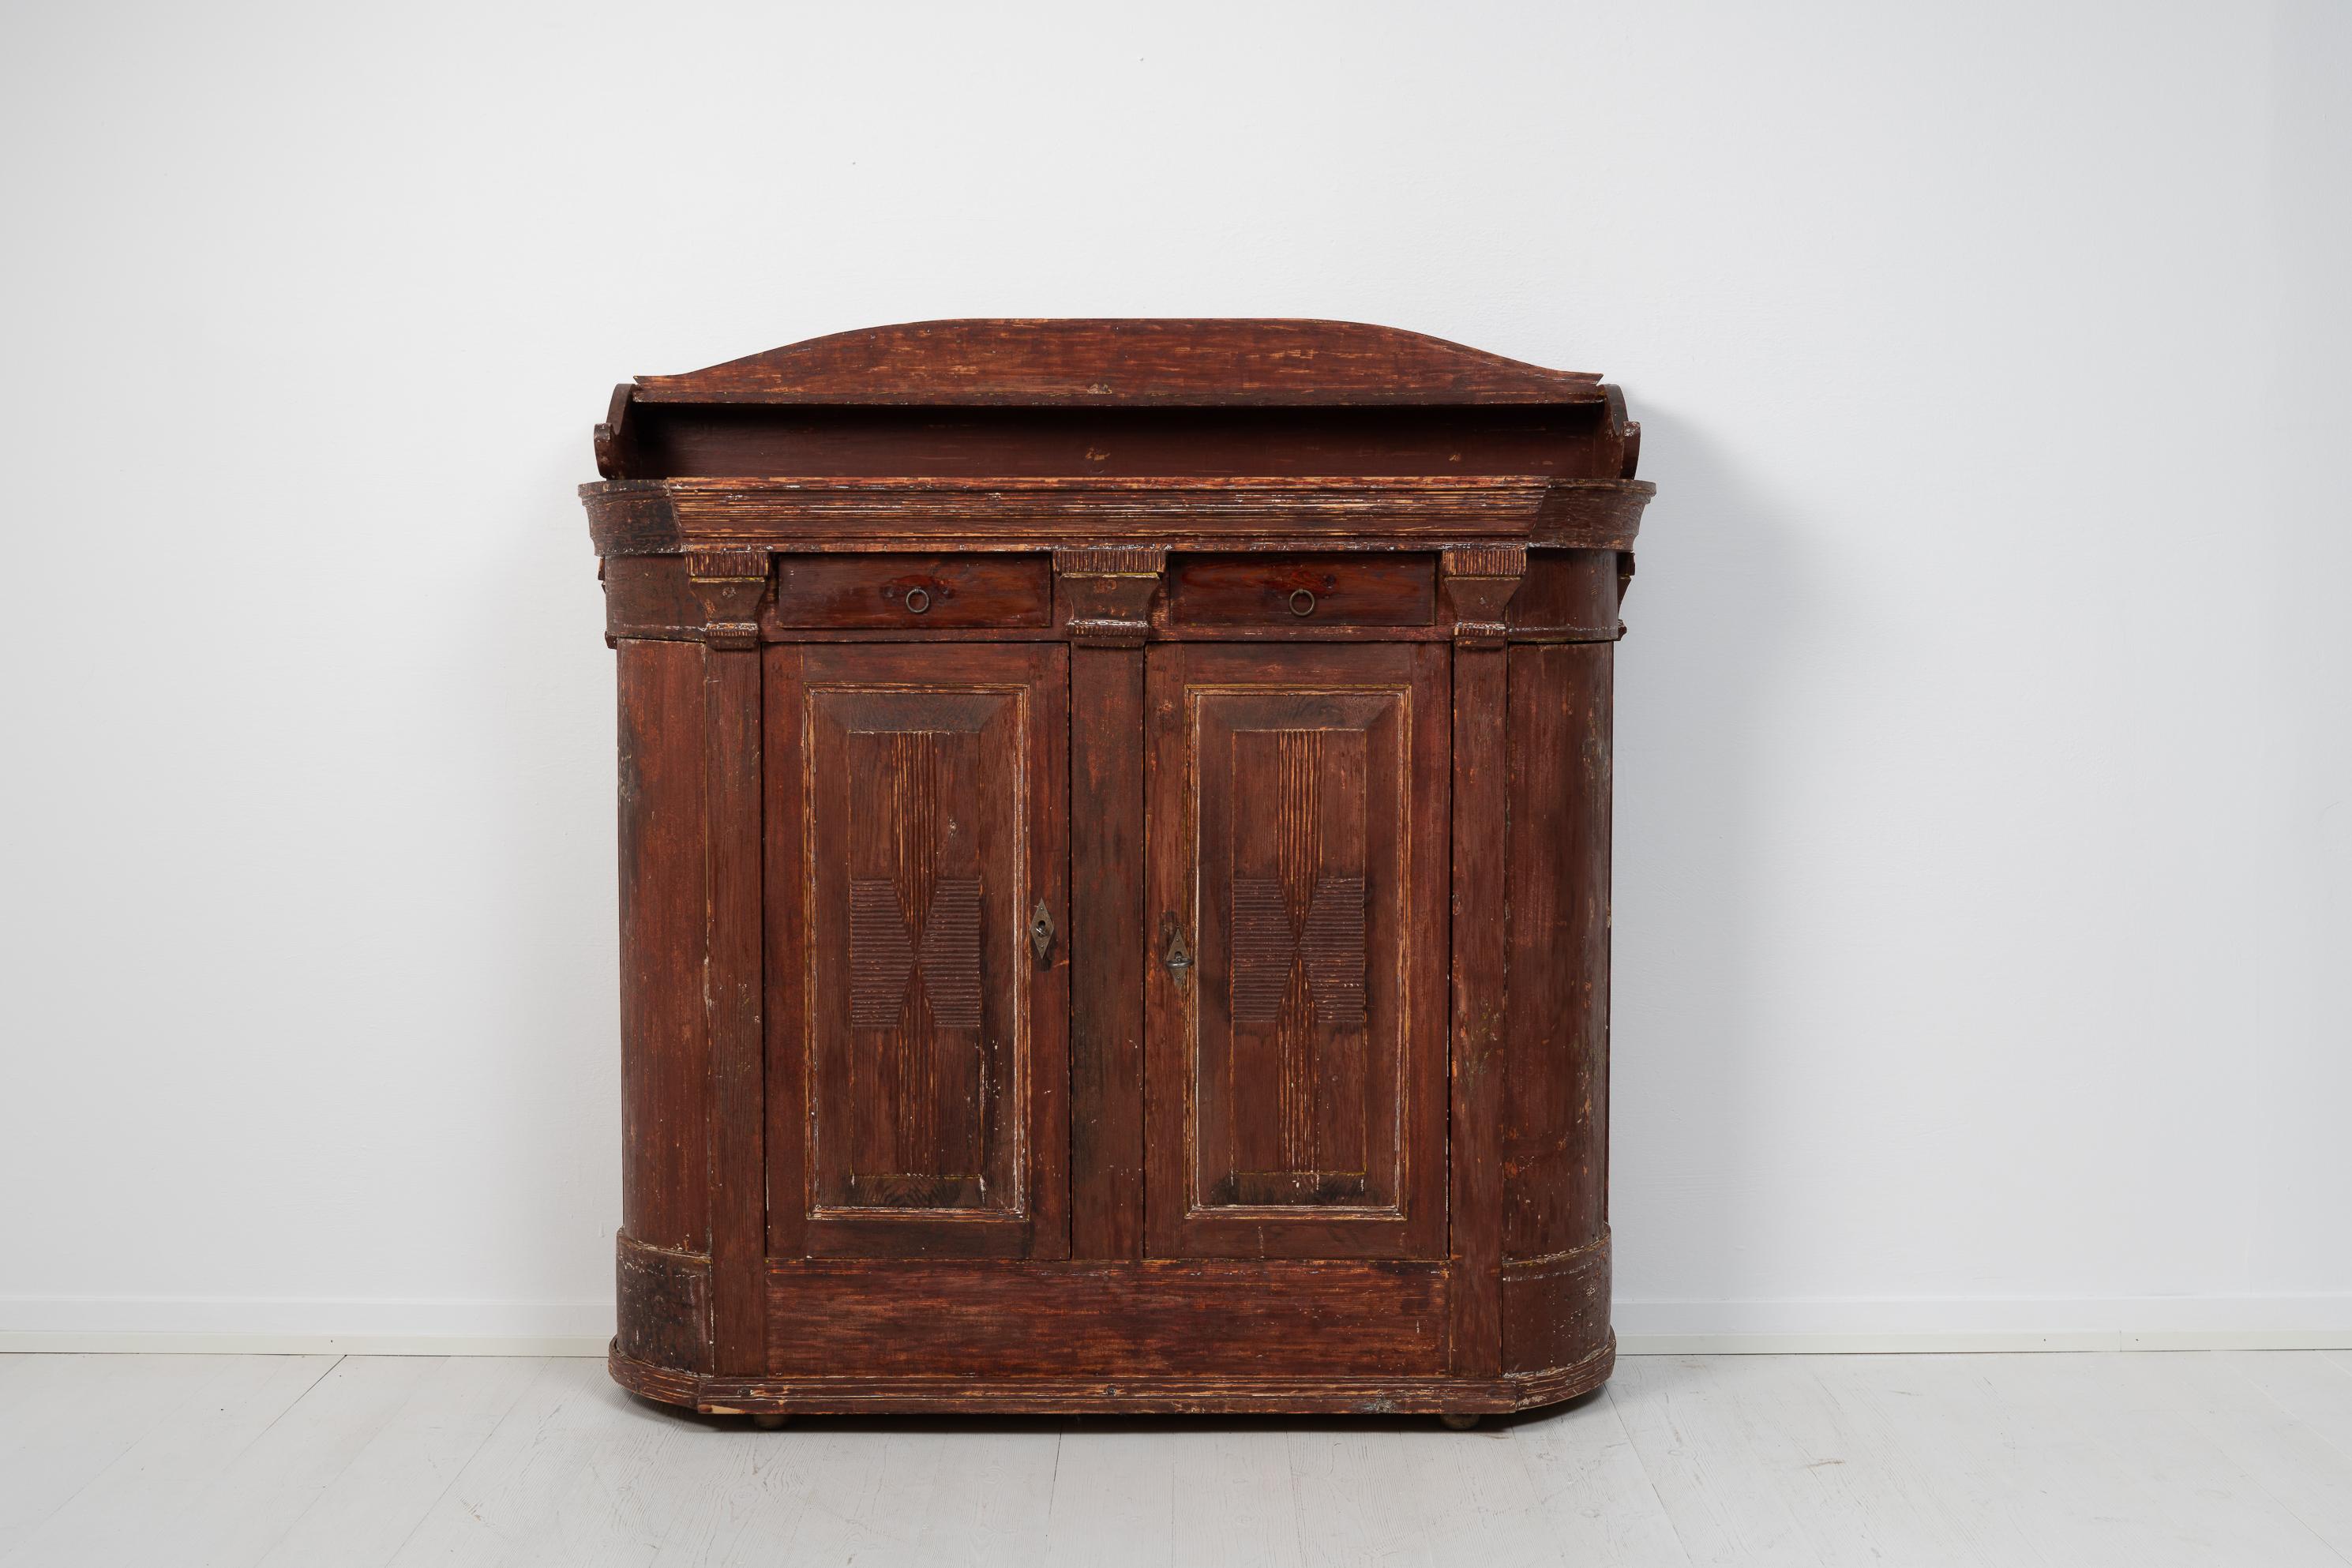 Country house sideboard with a curved front from northern Sweden. The sideboard is from the 1820 to 1830s and is made in painted pine. It has two doors and rounded corners as well as a hand carved decor. It also has two drawers as well as shelves